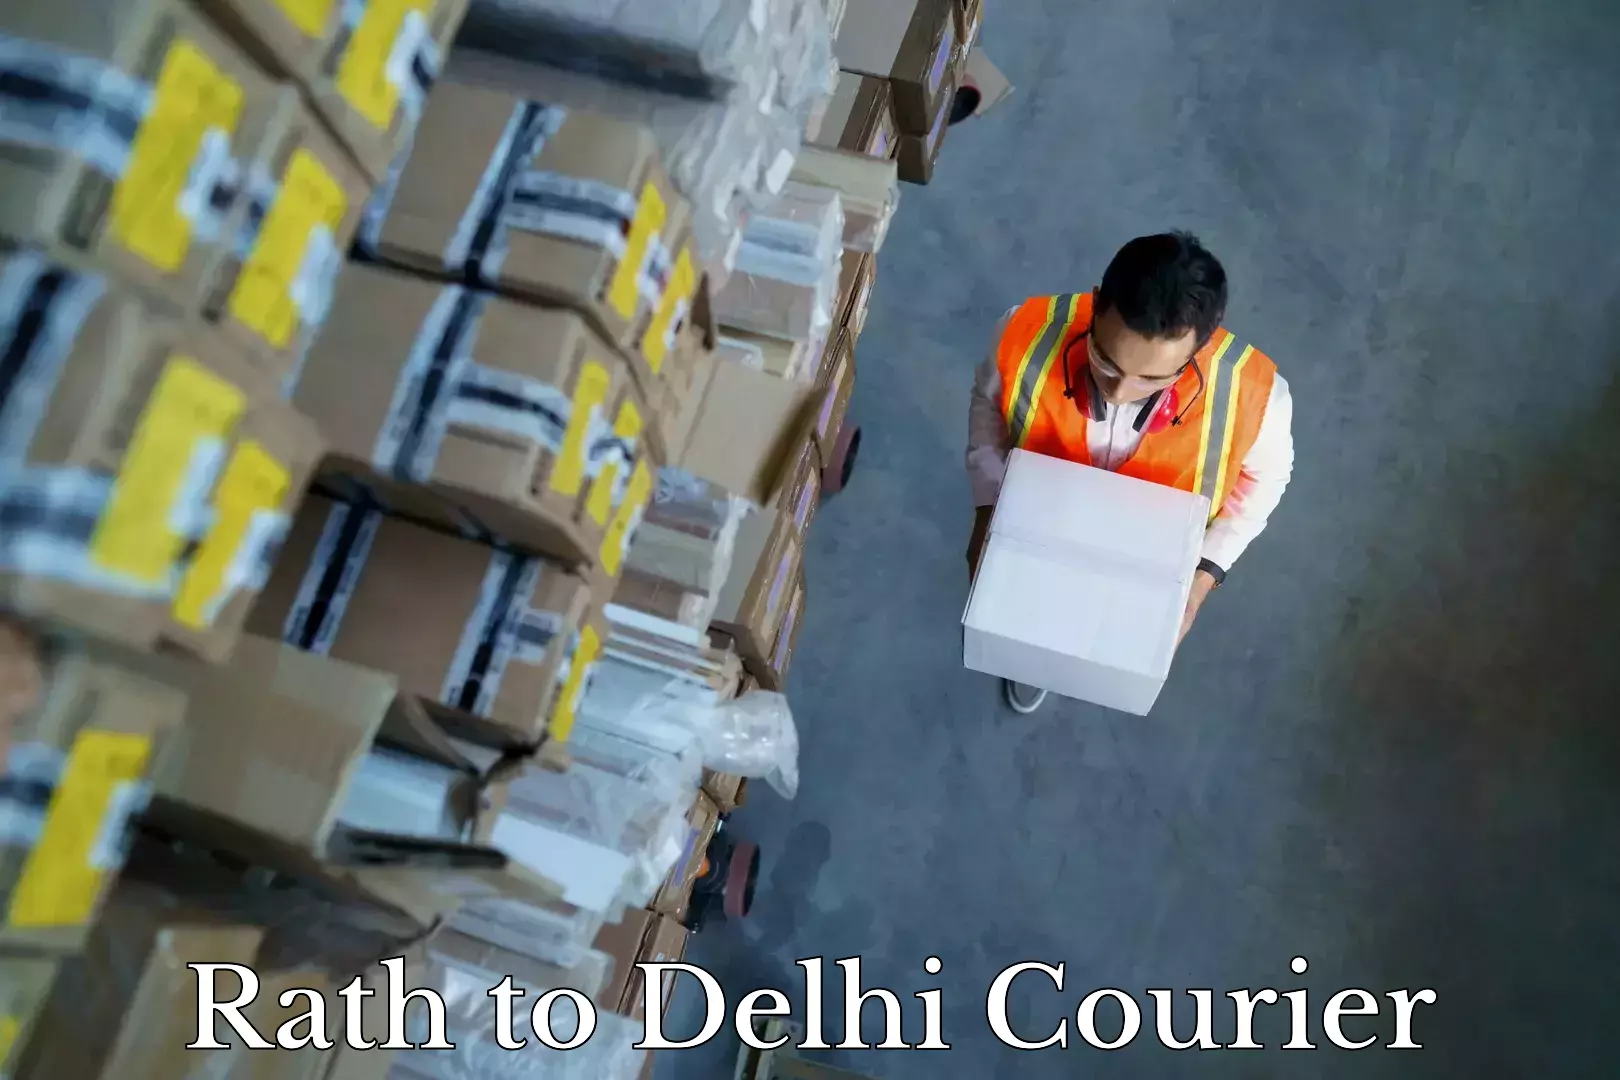 Professional moving assistance in Rath to University of Delhi